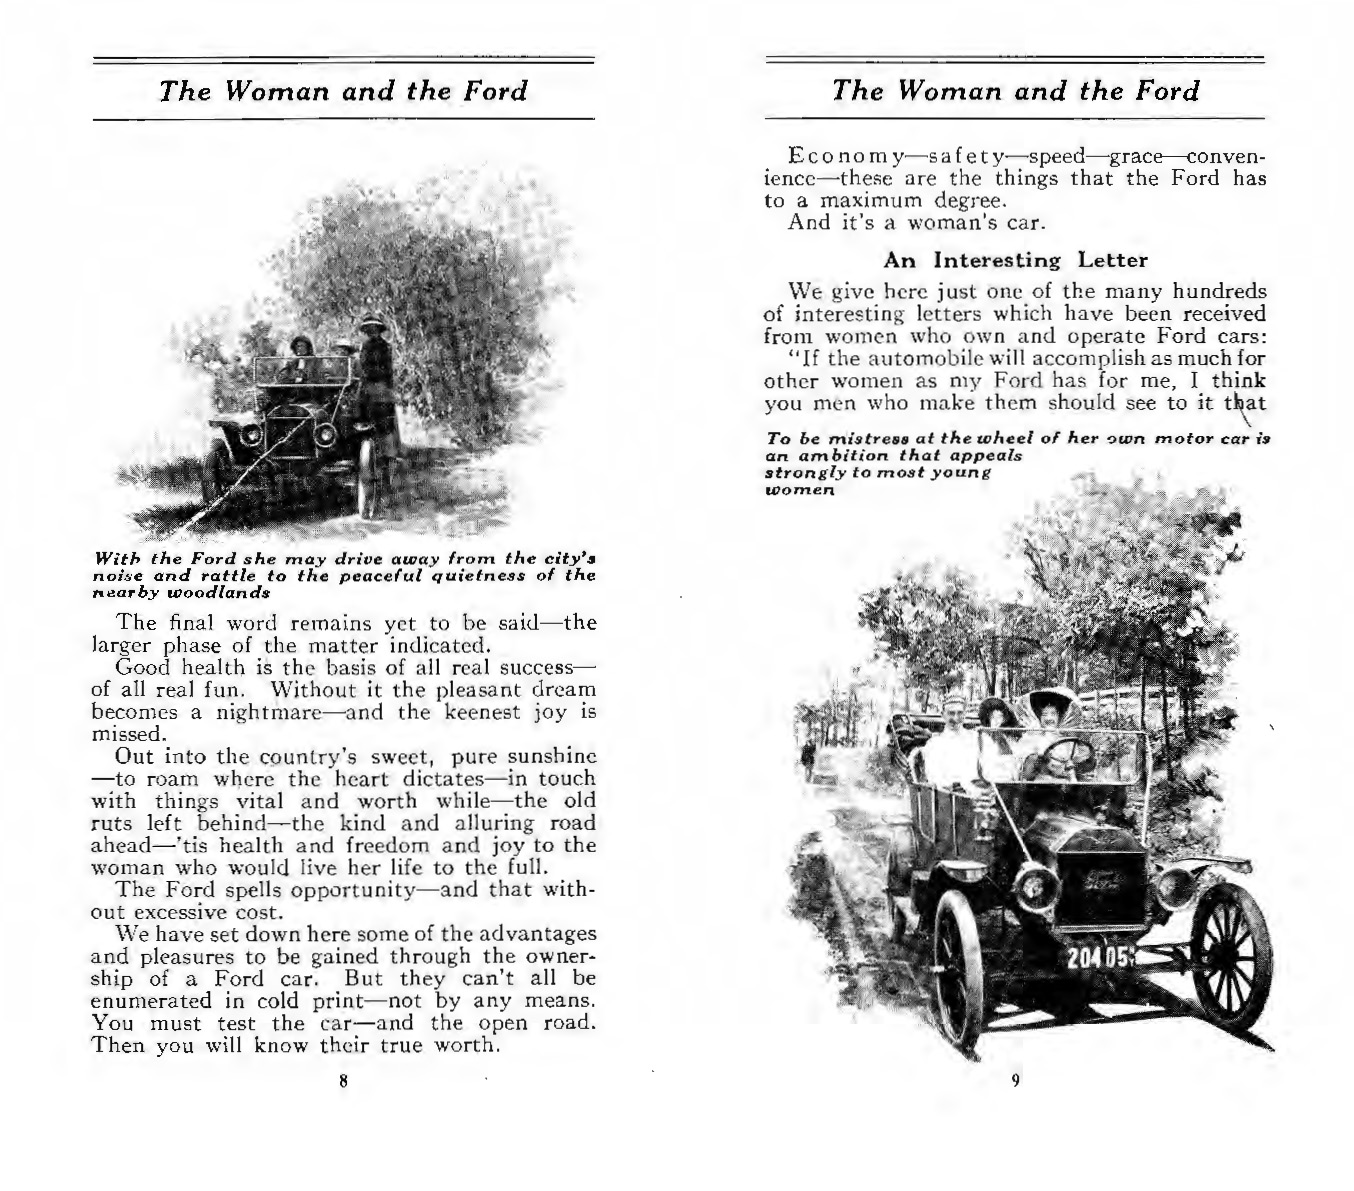 1912_The_Woman__the_Ford-08-09